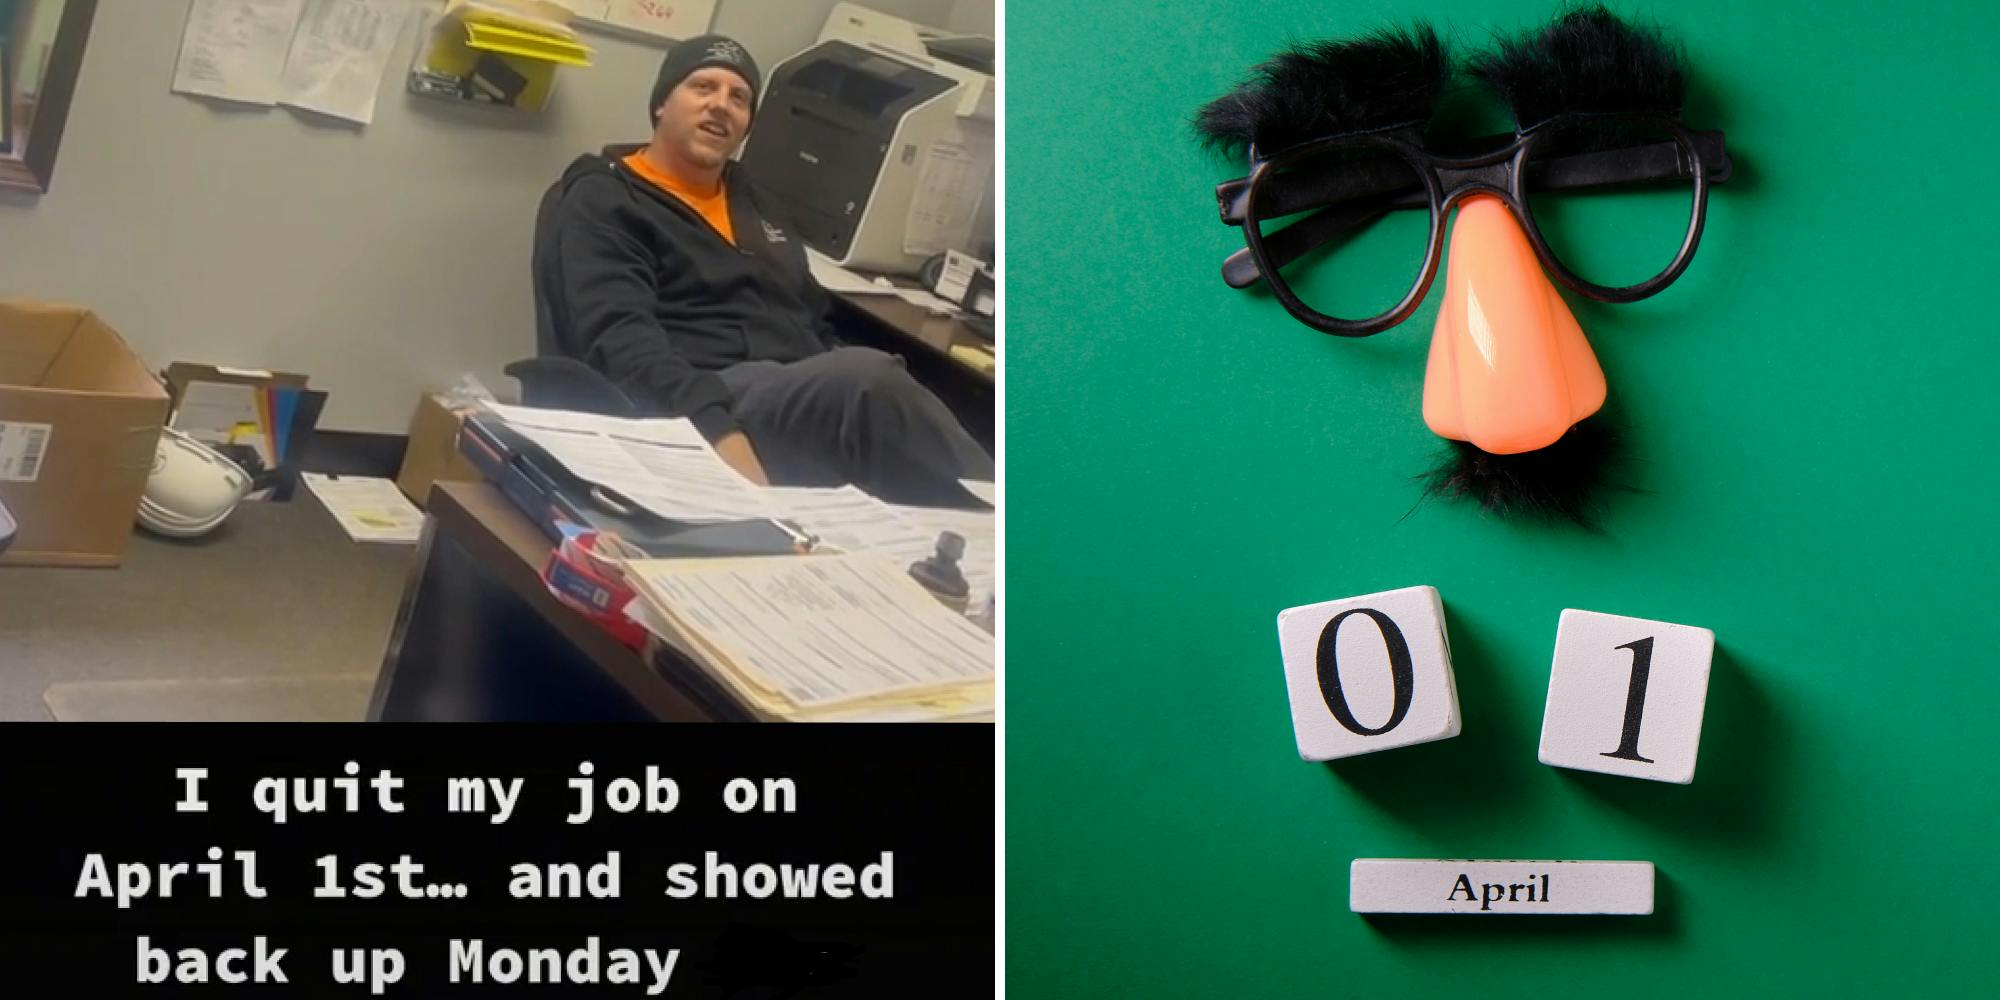 Man at desk caption "I quit my job on April 1st... and sowed back up Monday" (l) April fools concept funny glassed 0/1 date blocks and april block on green background (r)